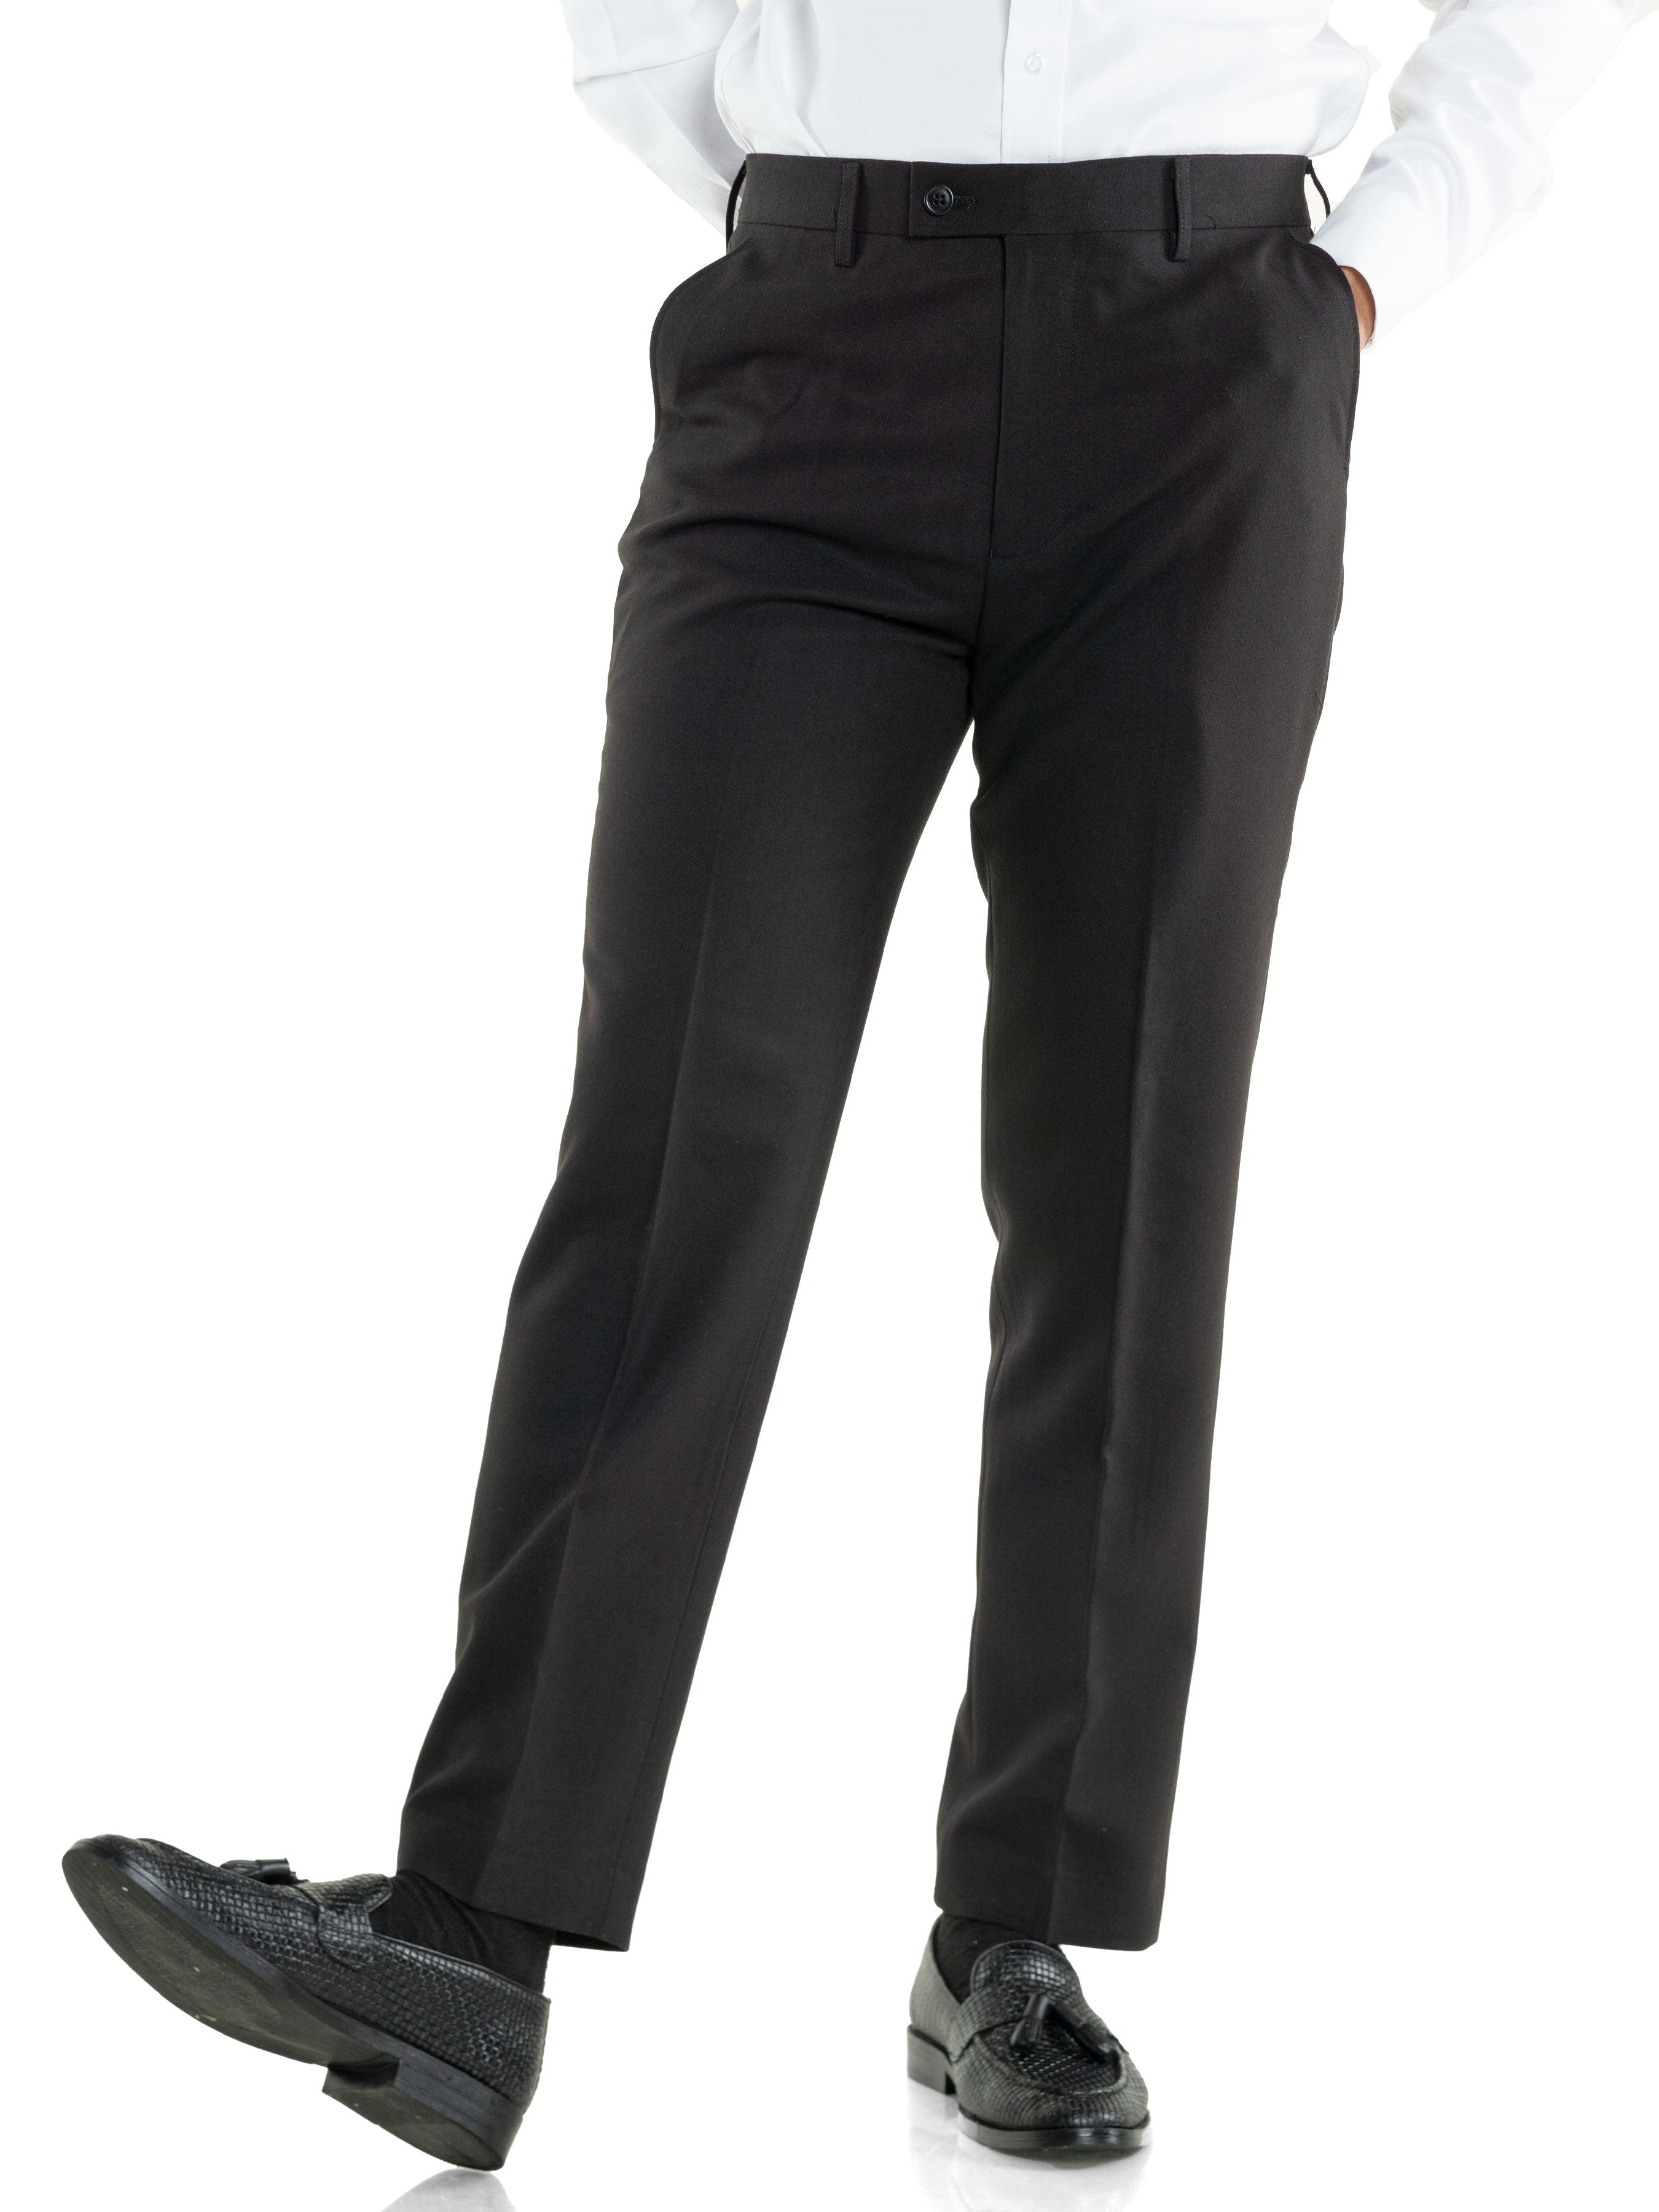 Buy SHBM Formal Pants for Men | Men's Regular fit Formal Pant Combo | Non Stretchable  Trouser | Office wear Trousers - Black-Black_38 at Amazon.in